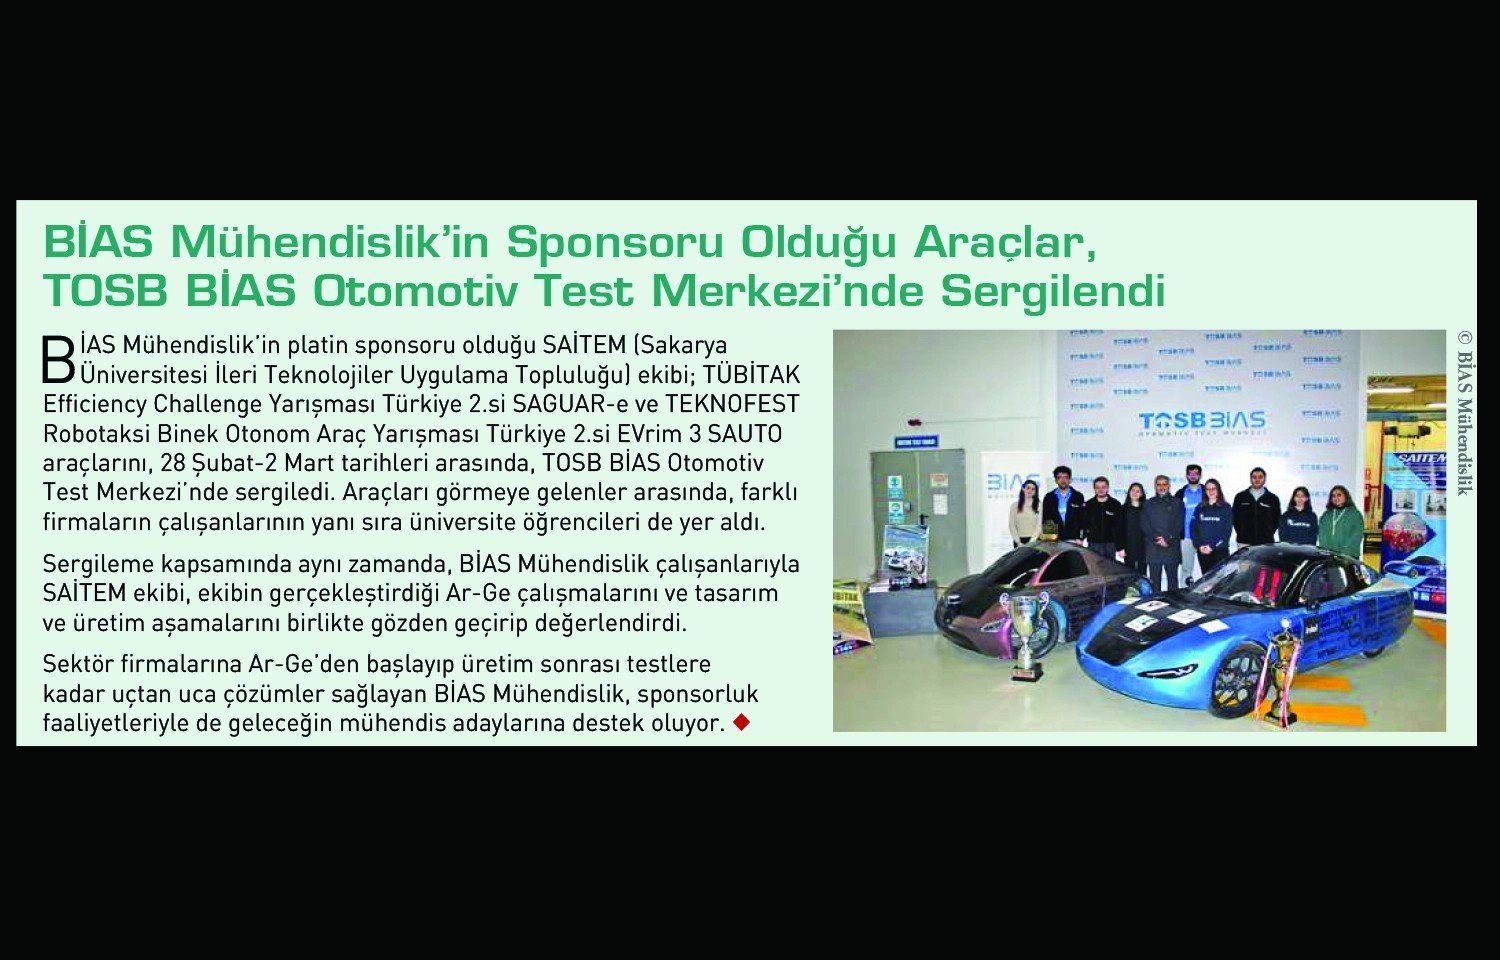 The News of the Vehicles Sponsored by BİAS Engineering was featured in MSI Magazine!